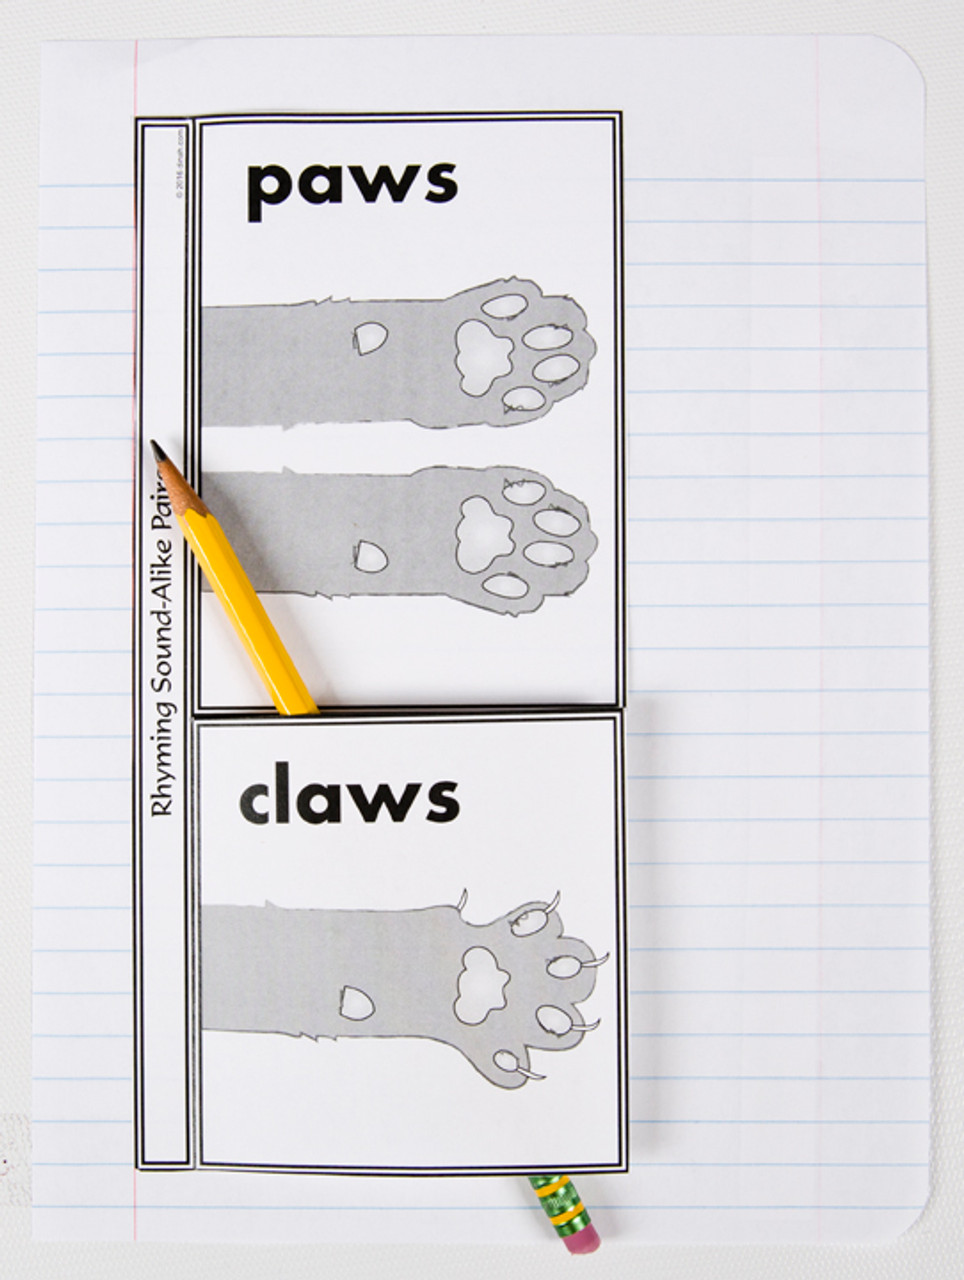 D-nc-l110-0032-en-b homophone pairs paws and claws copy